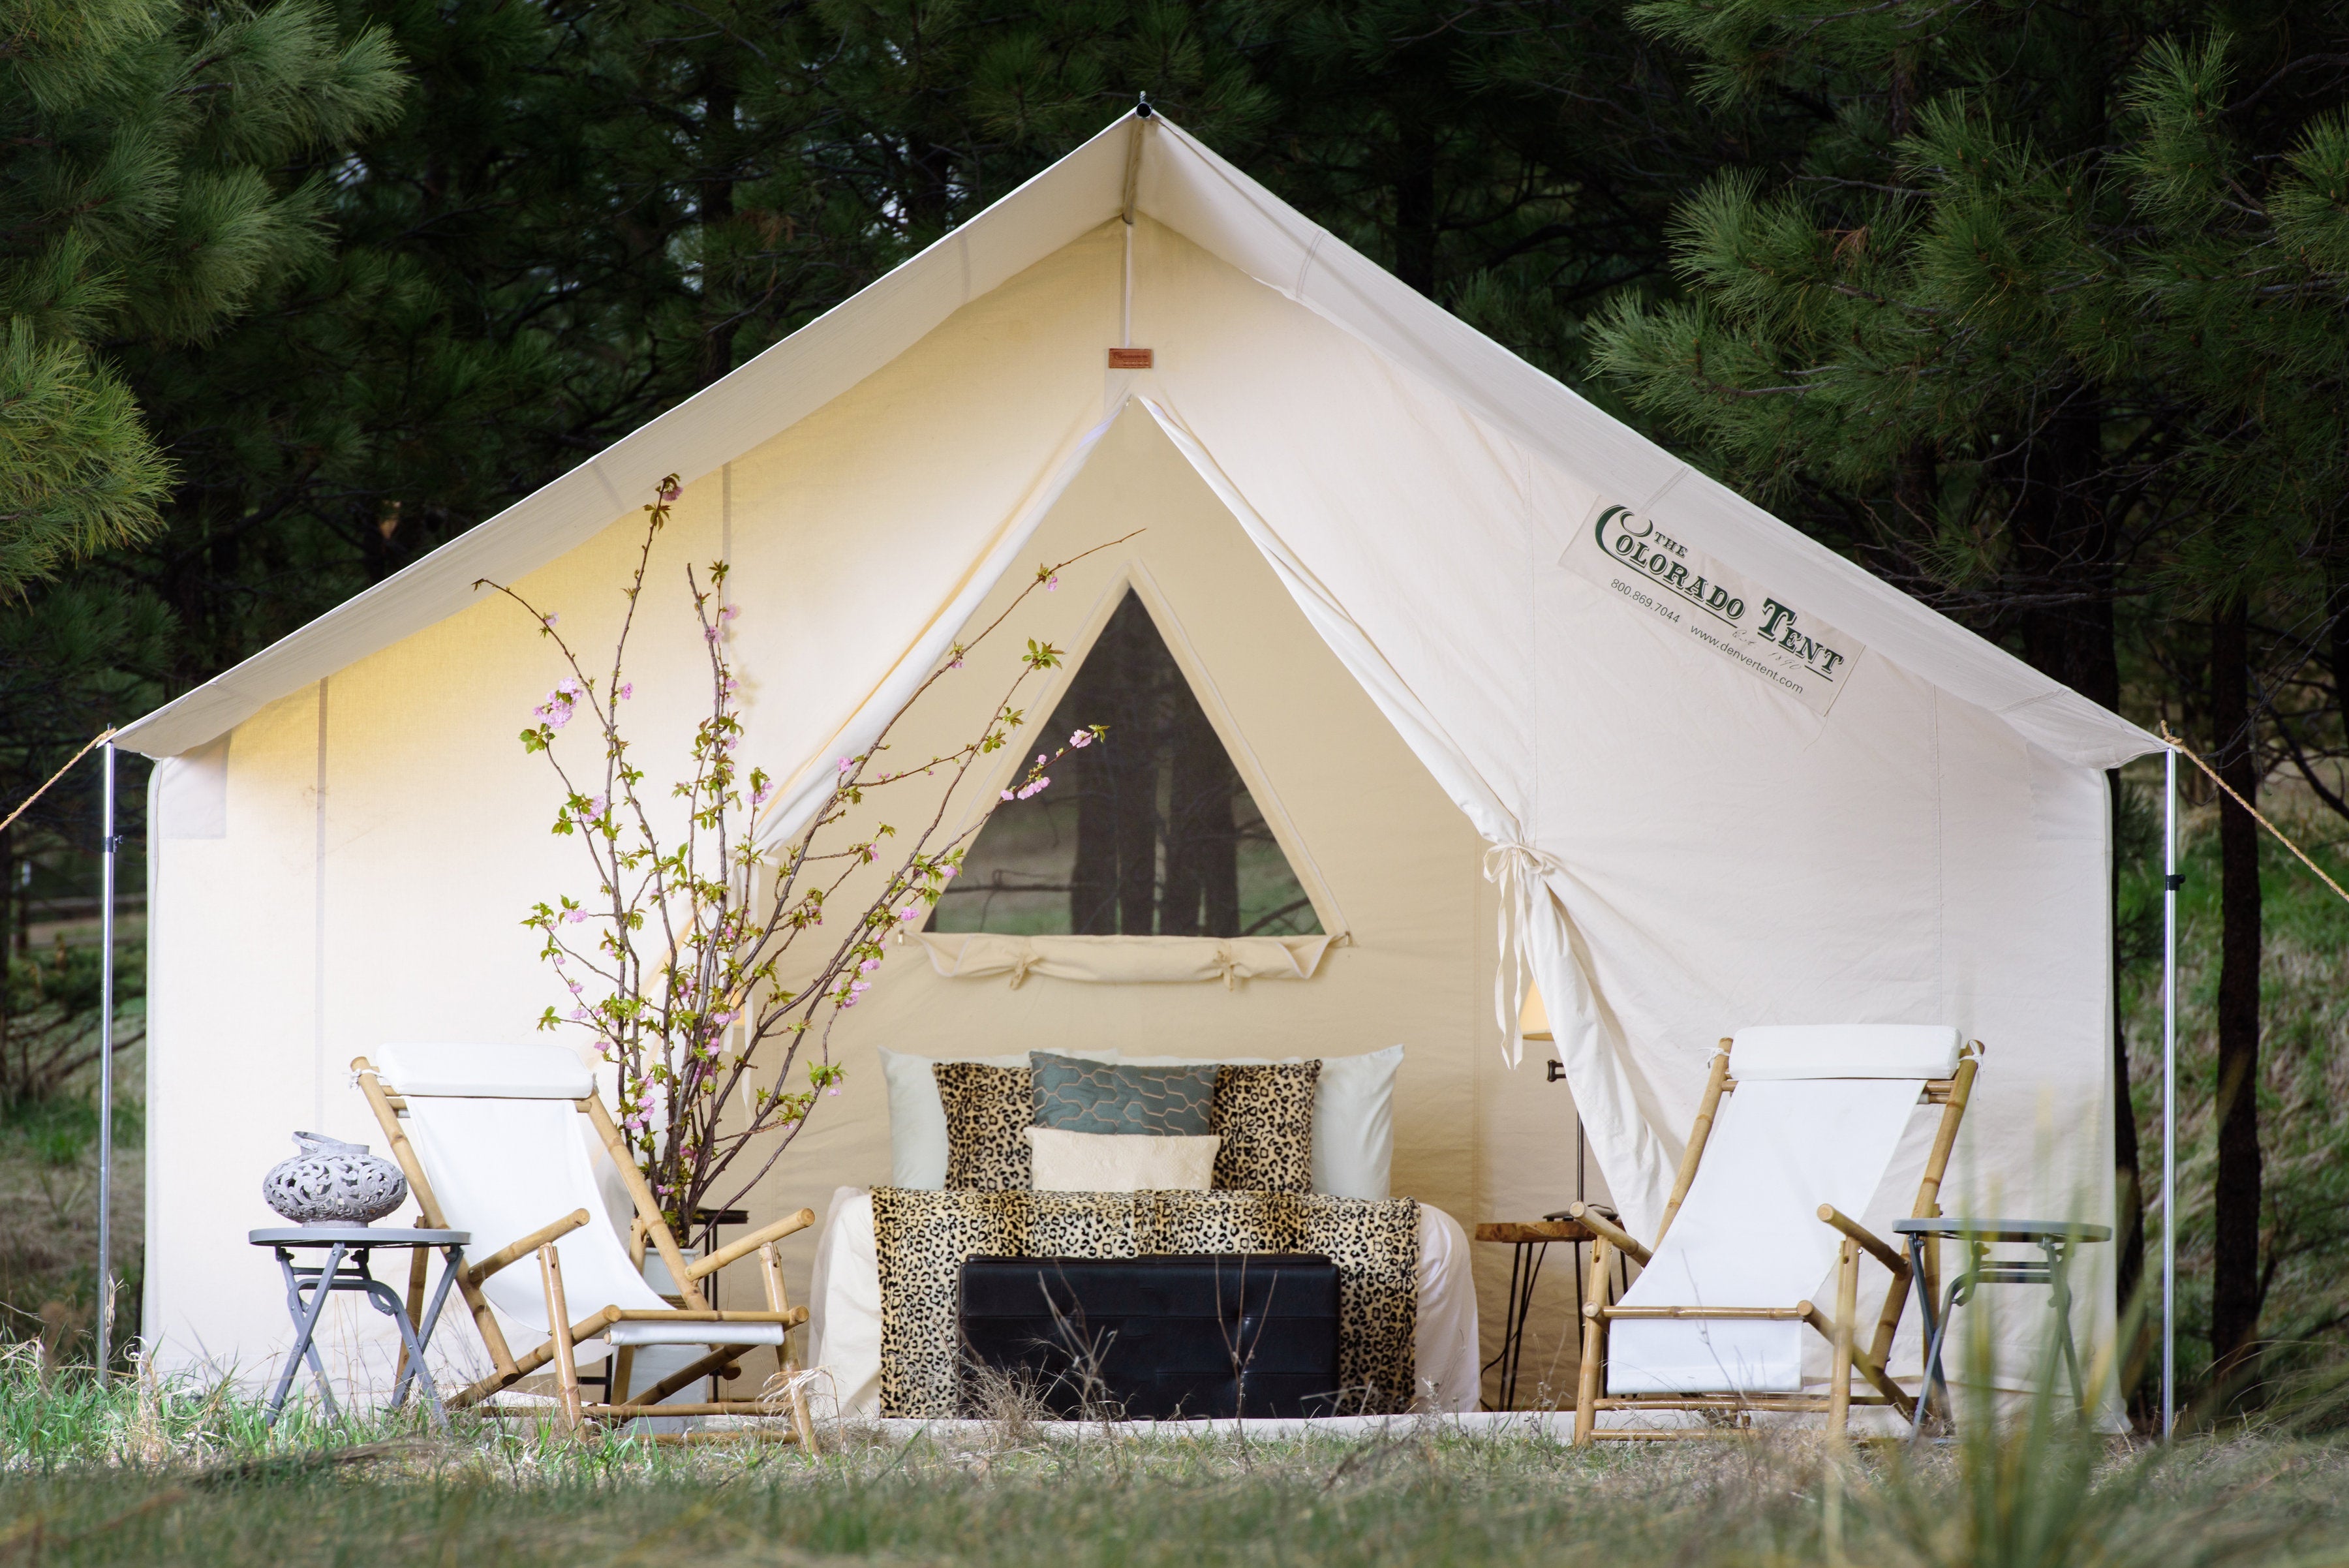 Colorado Wall Tent setup for Glamping or Glamp Sites.  Made of 100% Canvas in the USA